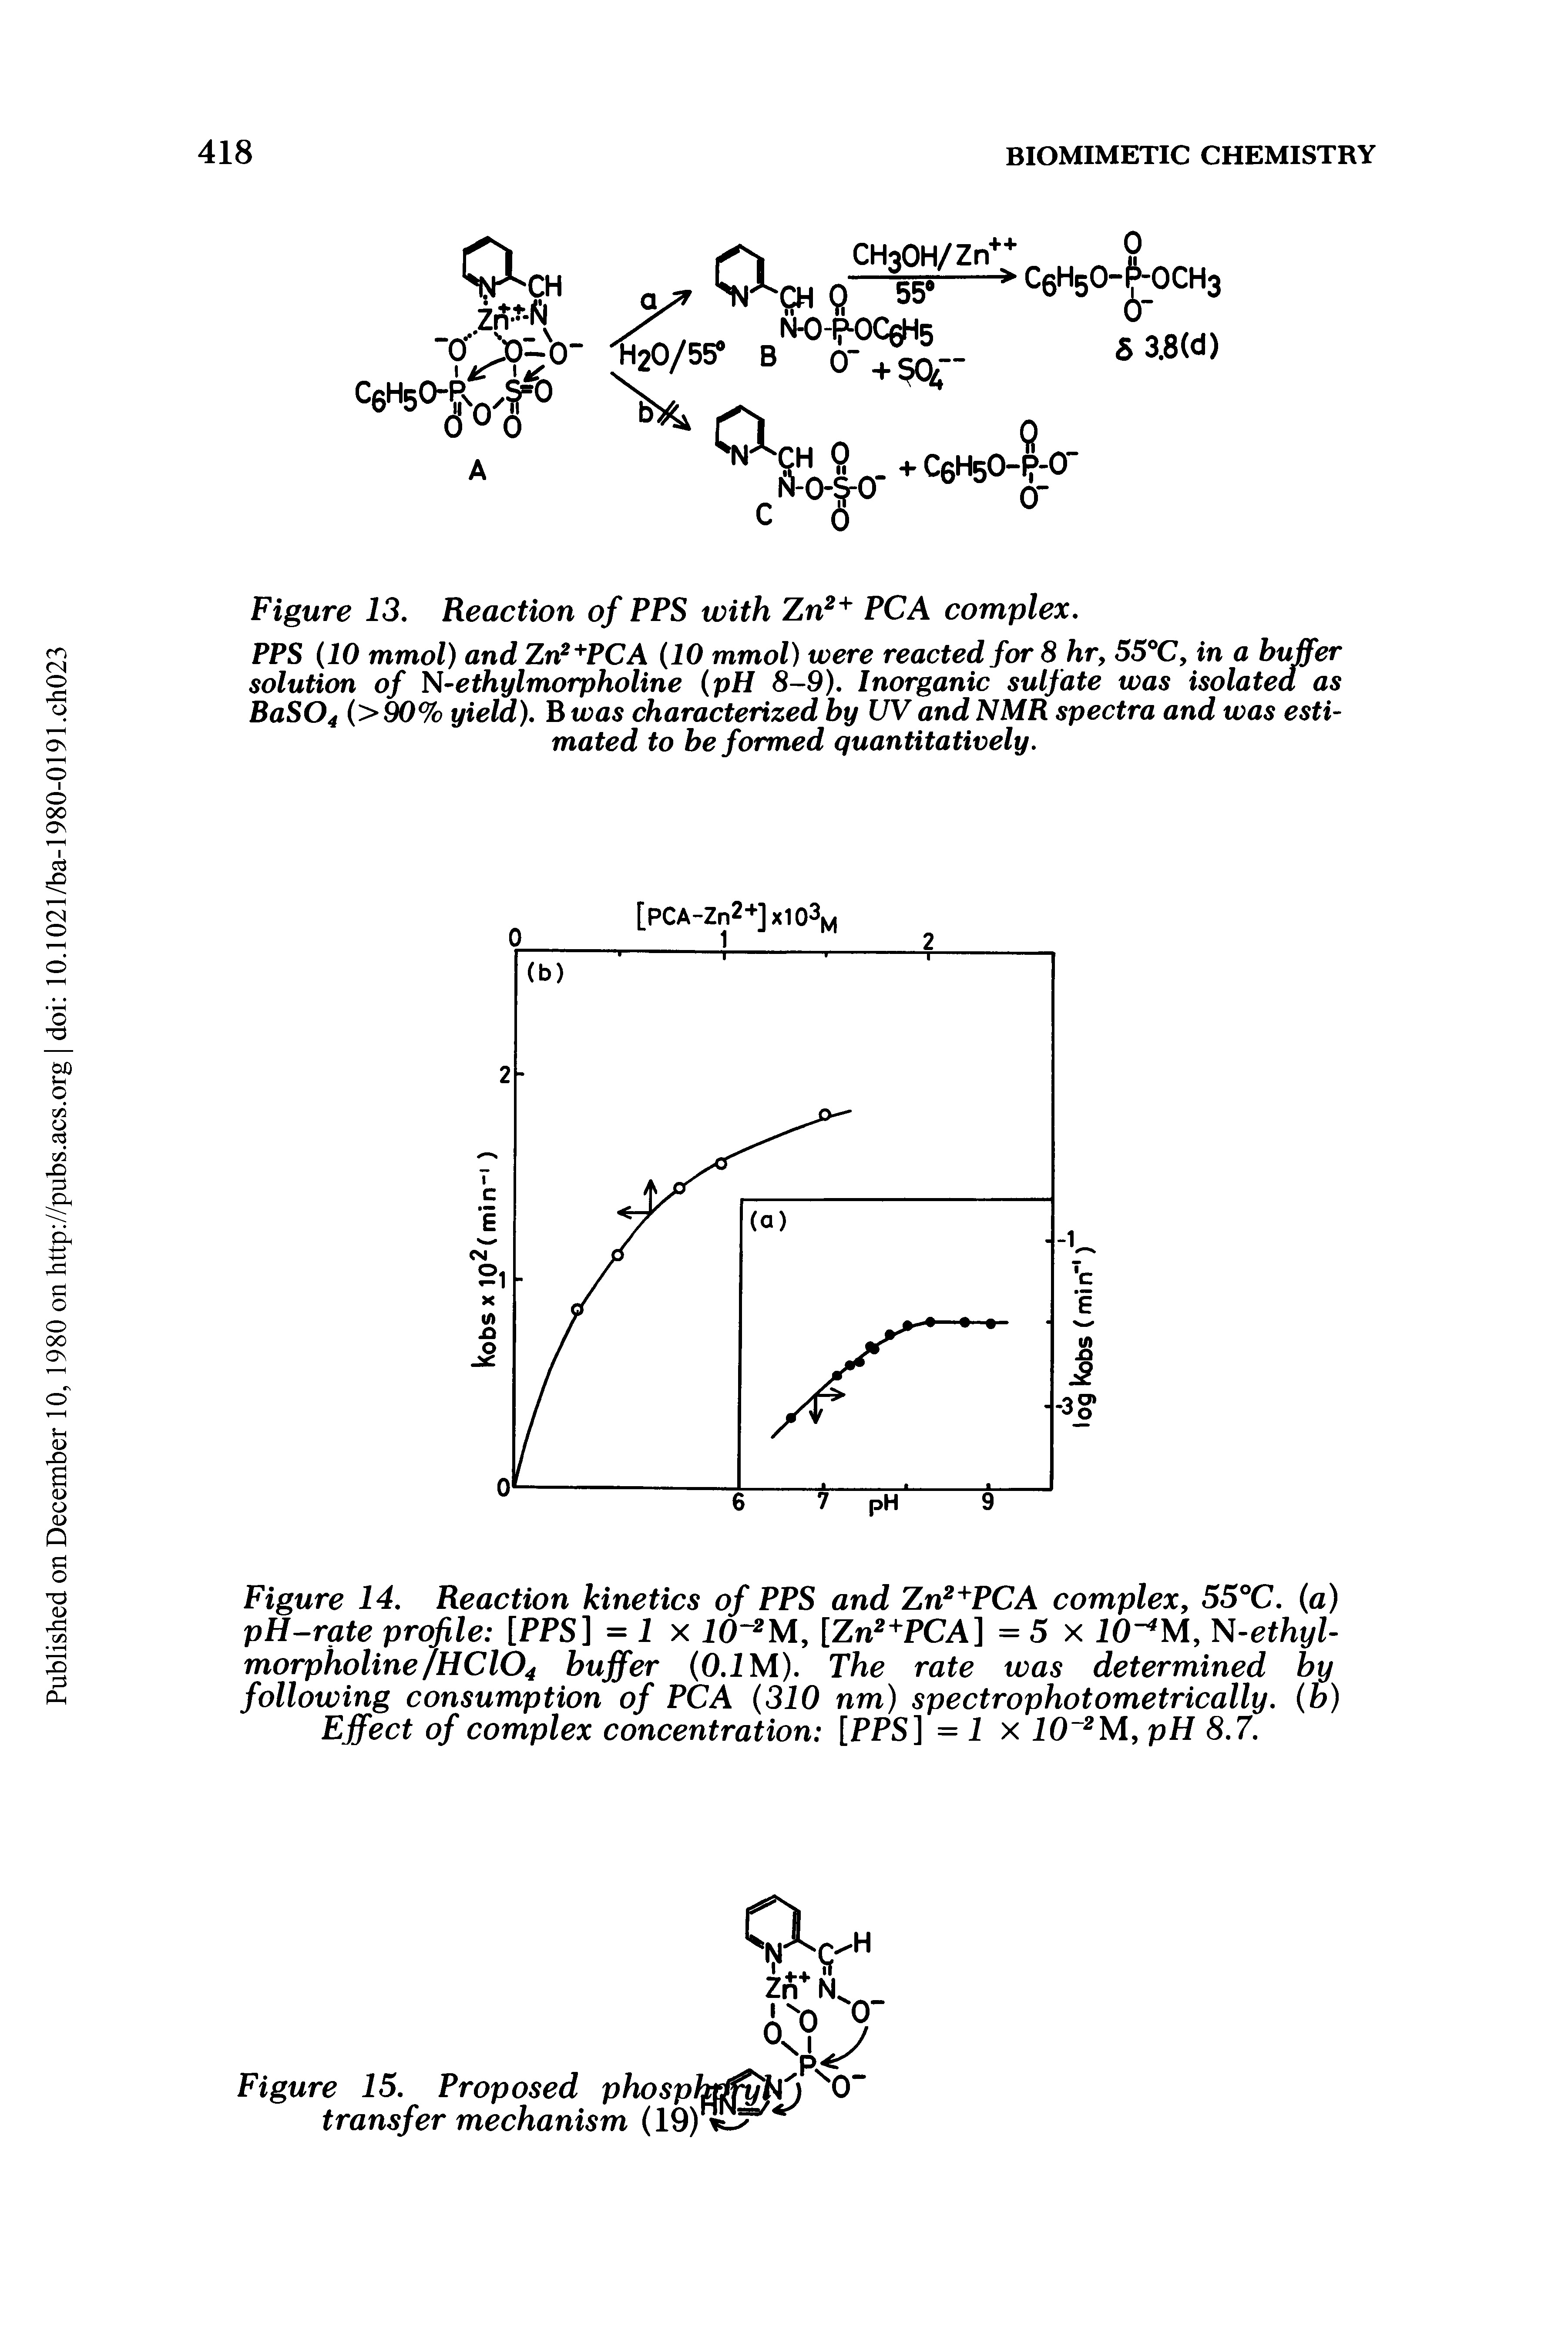 Figure 14. Reaction kinetics of PPS and Zn2+PCA complex, 55°C. (a) pH-rqte profile [PPS] = 1 x 10 2M, [Zn2+PCA] = 5 x W4M, -ethyl-morpholine/HC104 buffer (0.1 M). The rate was determined by following consumption of PCA (310 nm) spectrophotometrically. (b) Effect of complex concentration [PPS] = 1 x 10 2M, pH 8.7.